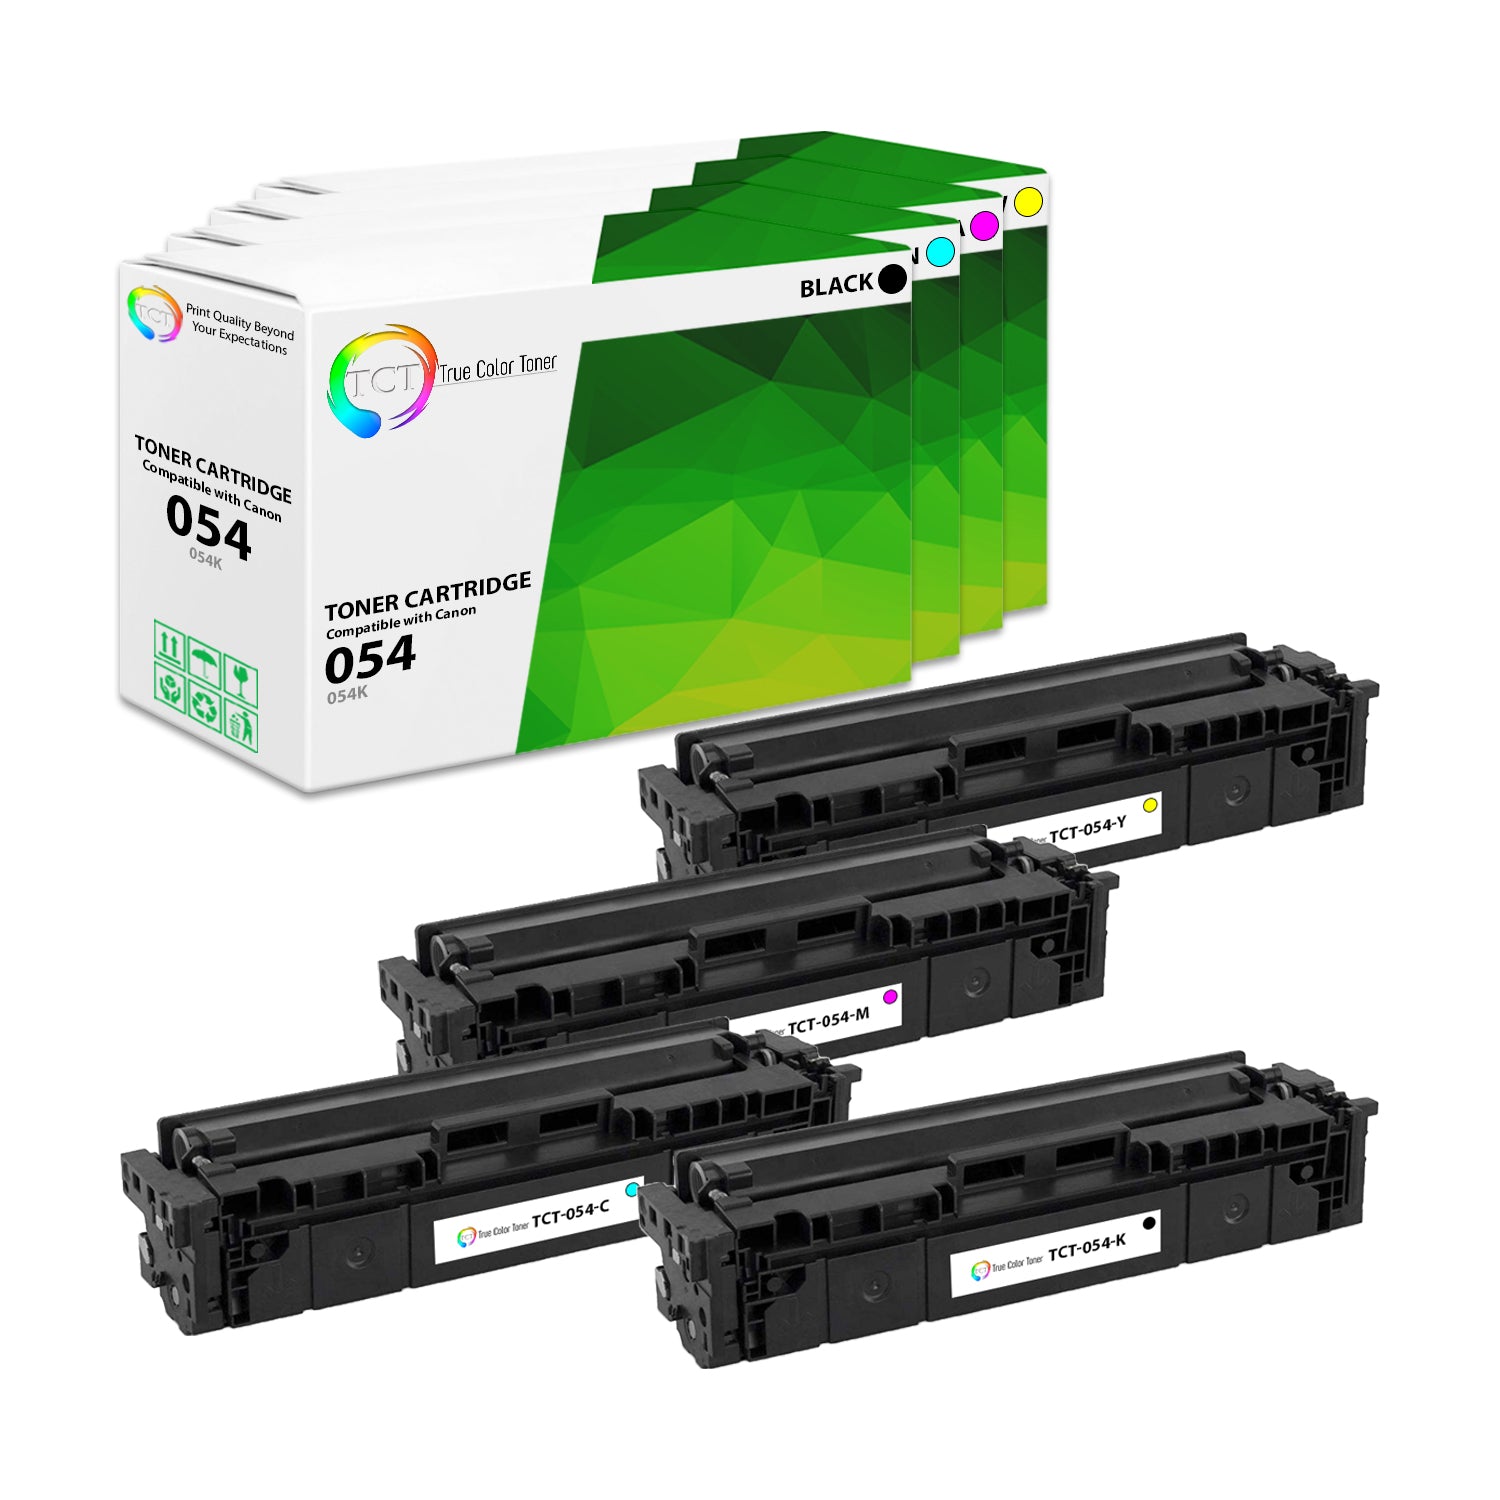 TCT Compatible Toner Cartridge Replacement for the Canon 054 Series - 4 Pack (BK, C, M, Y)